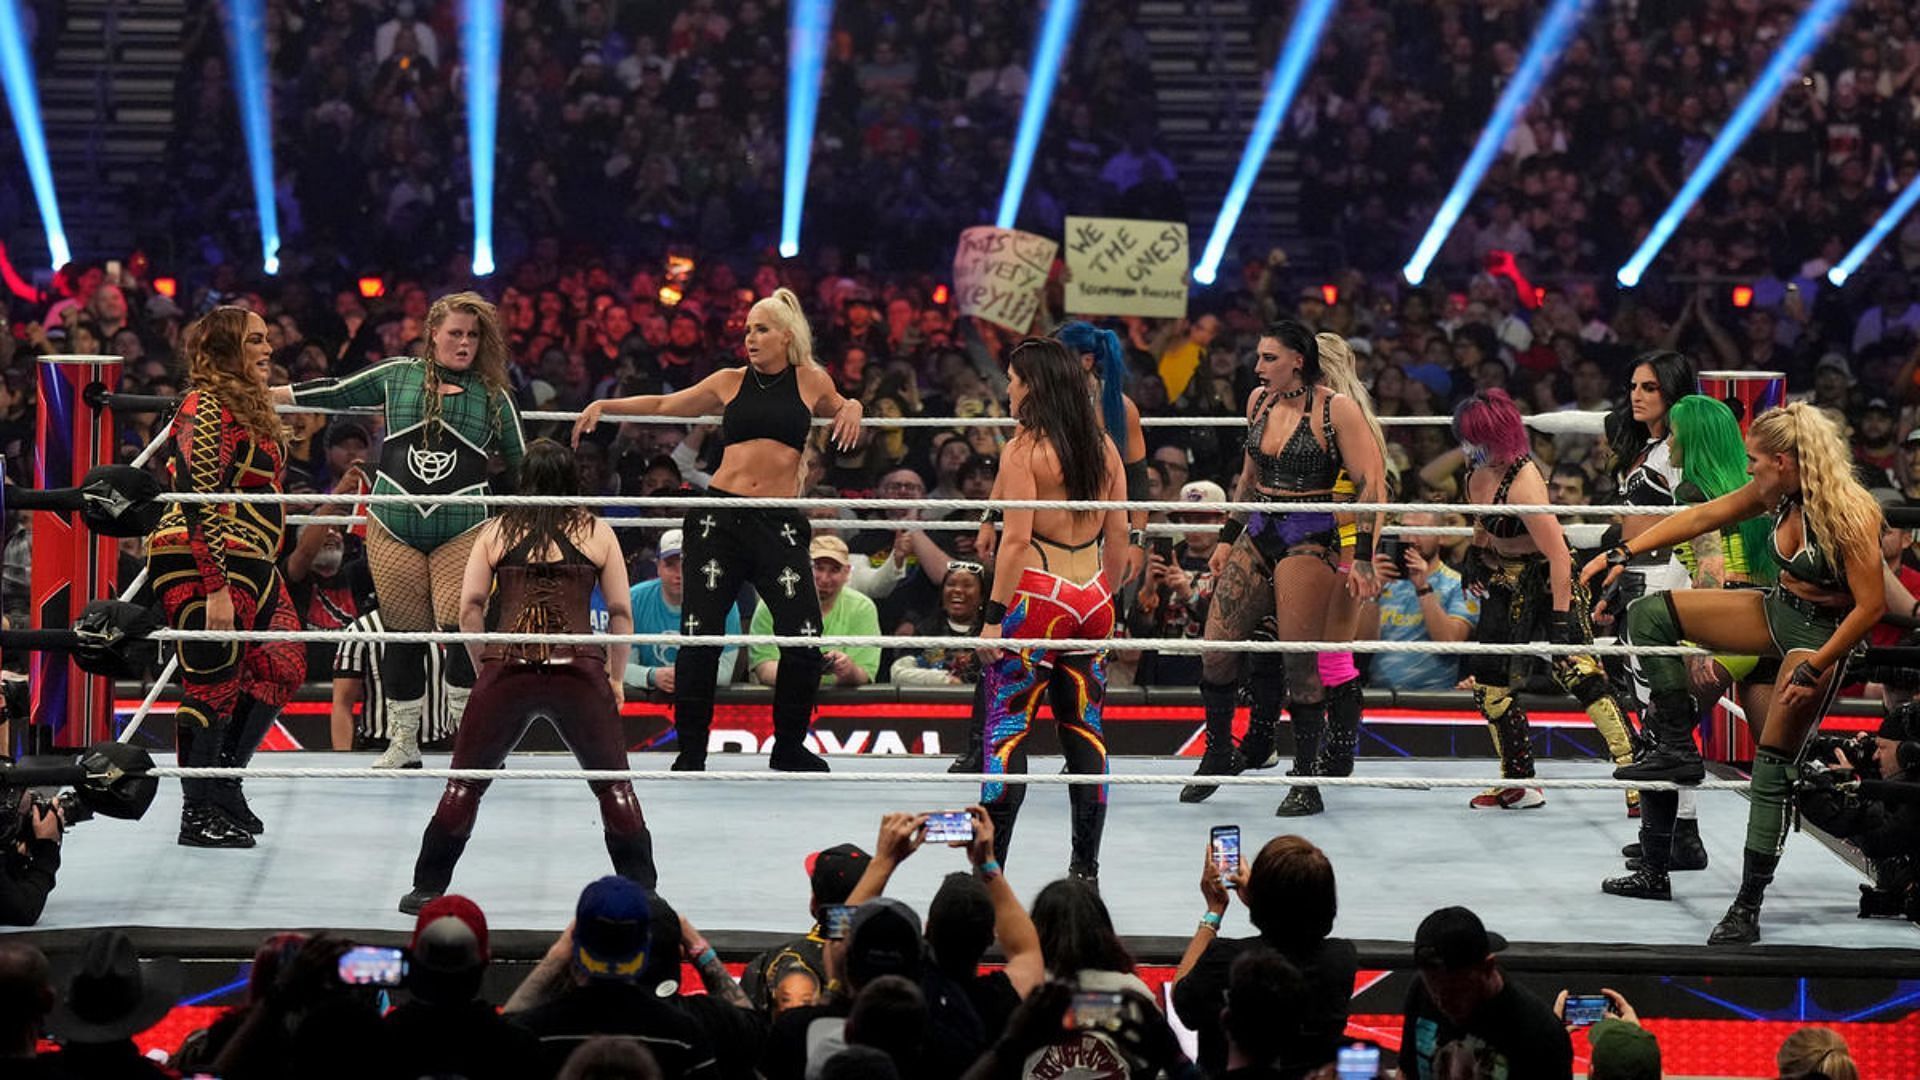 Scene from the 2023 Royal Rumble. Courtesy: WWE.com